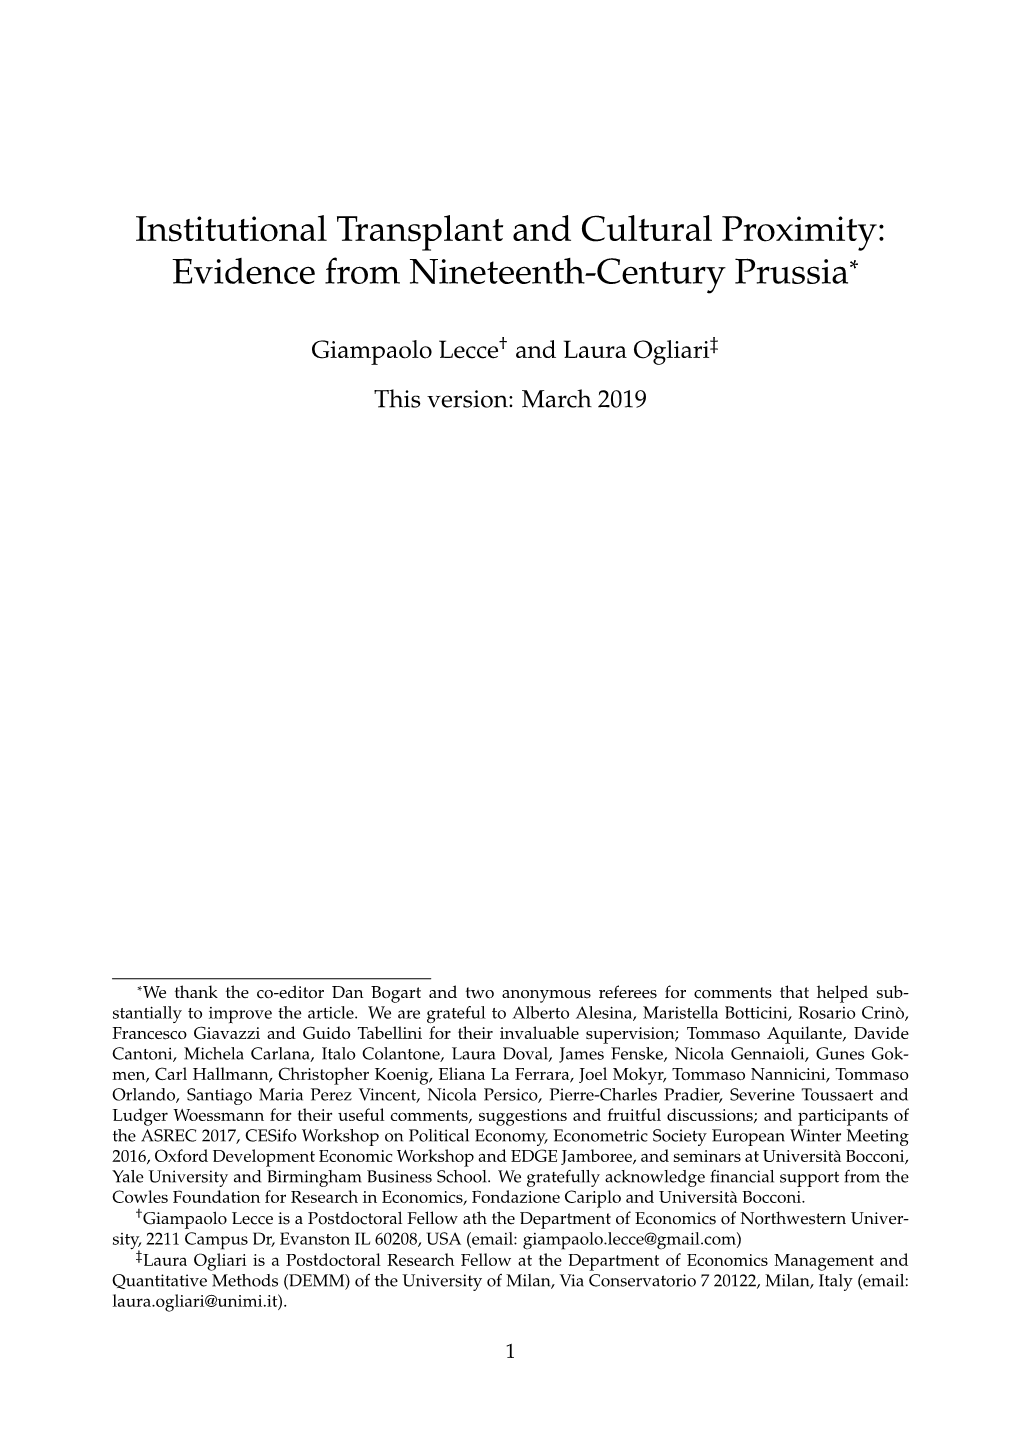 Institutional Transplant and Cultural Proximity: Evidence from Nineteenth-Century Prussia*